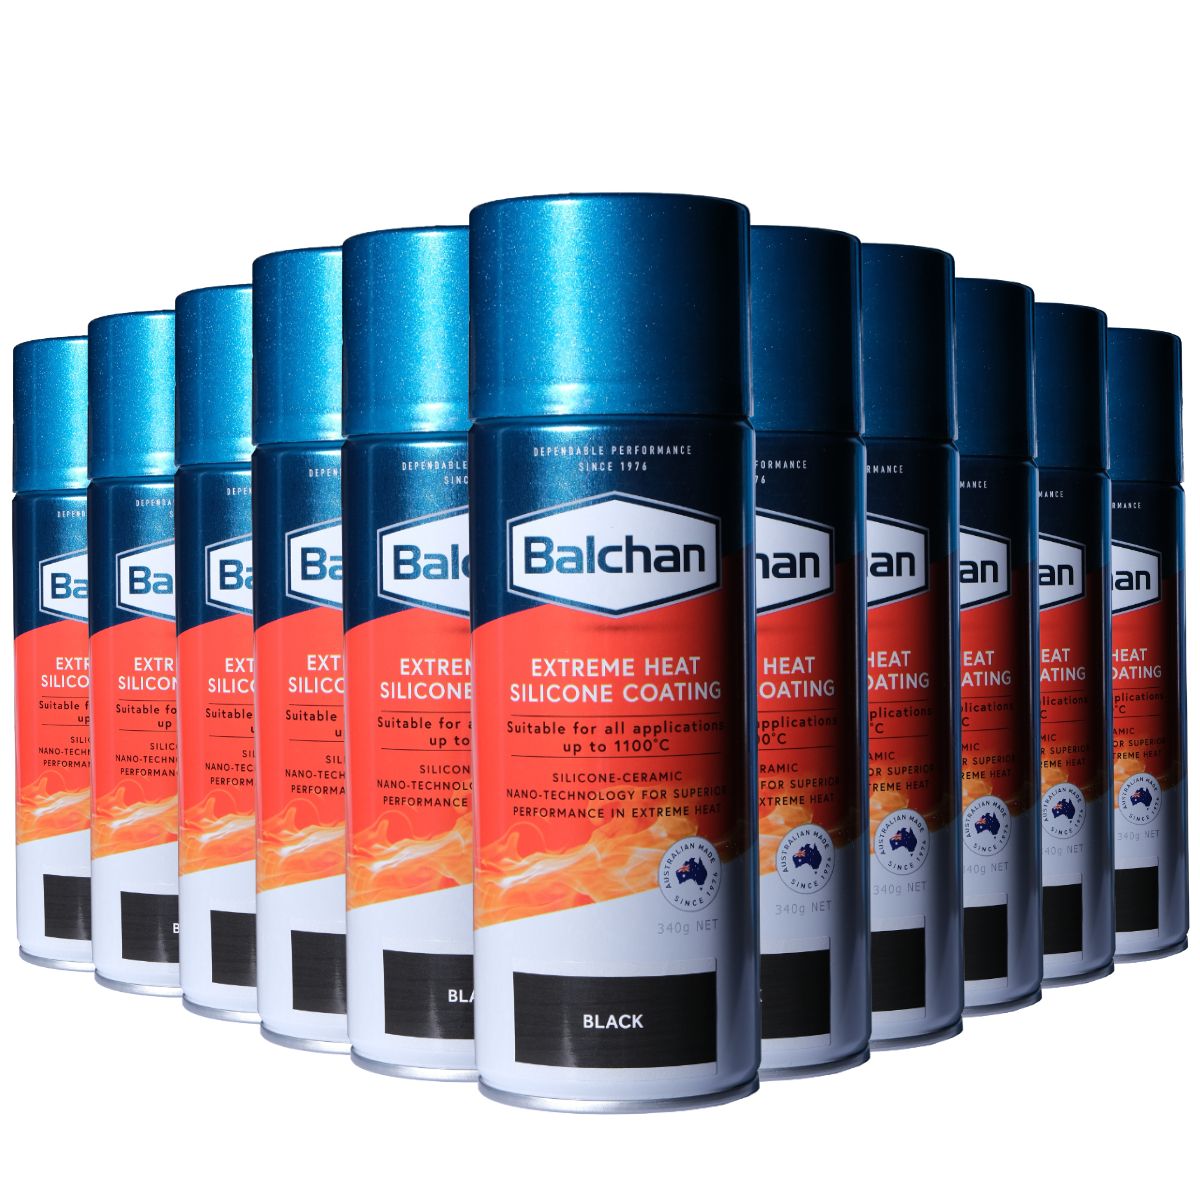 Balchan Extreme Heat Paint Black 340g BAL101001 - 12 Cans - South East Clearance Centre